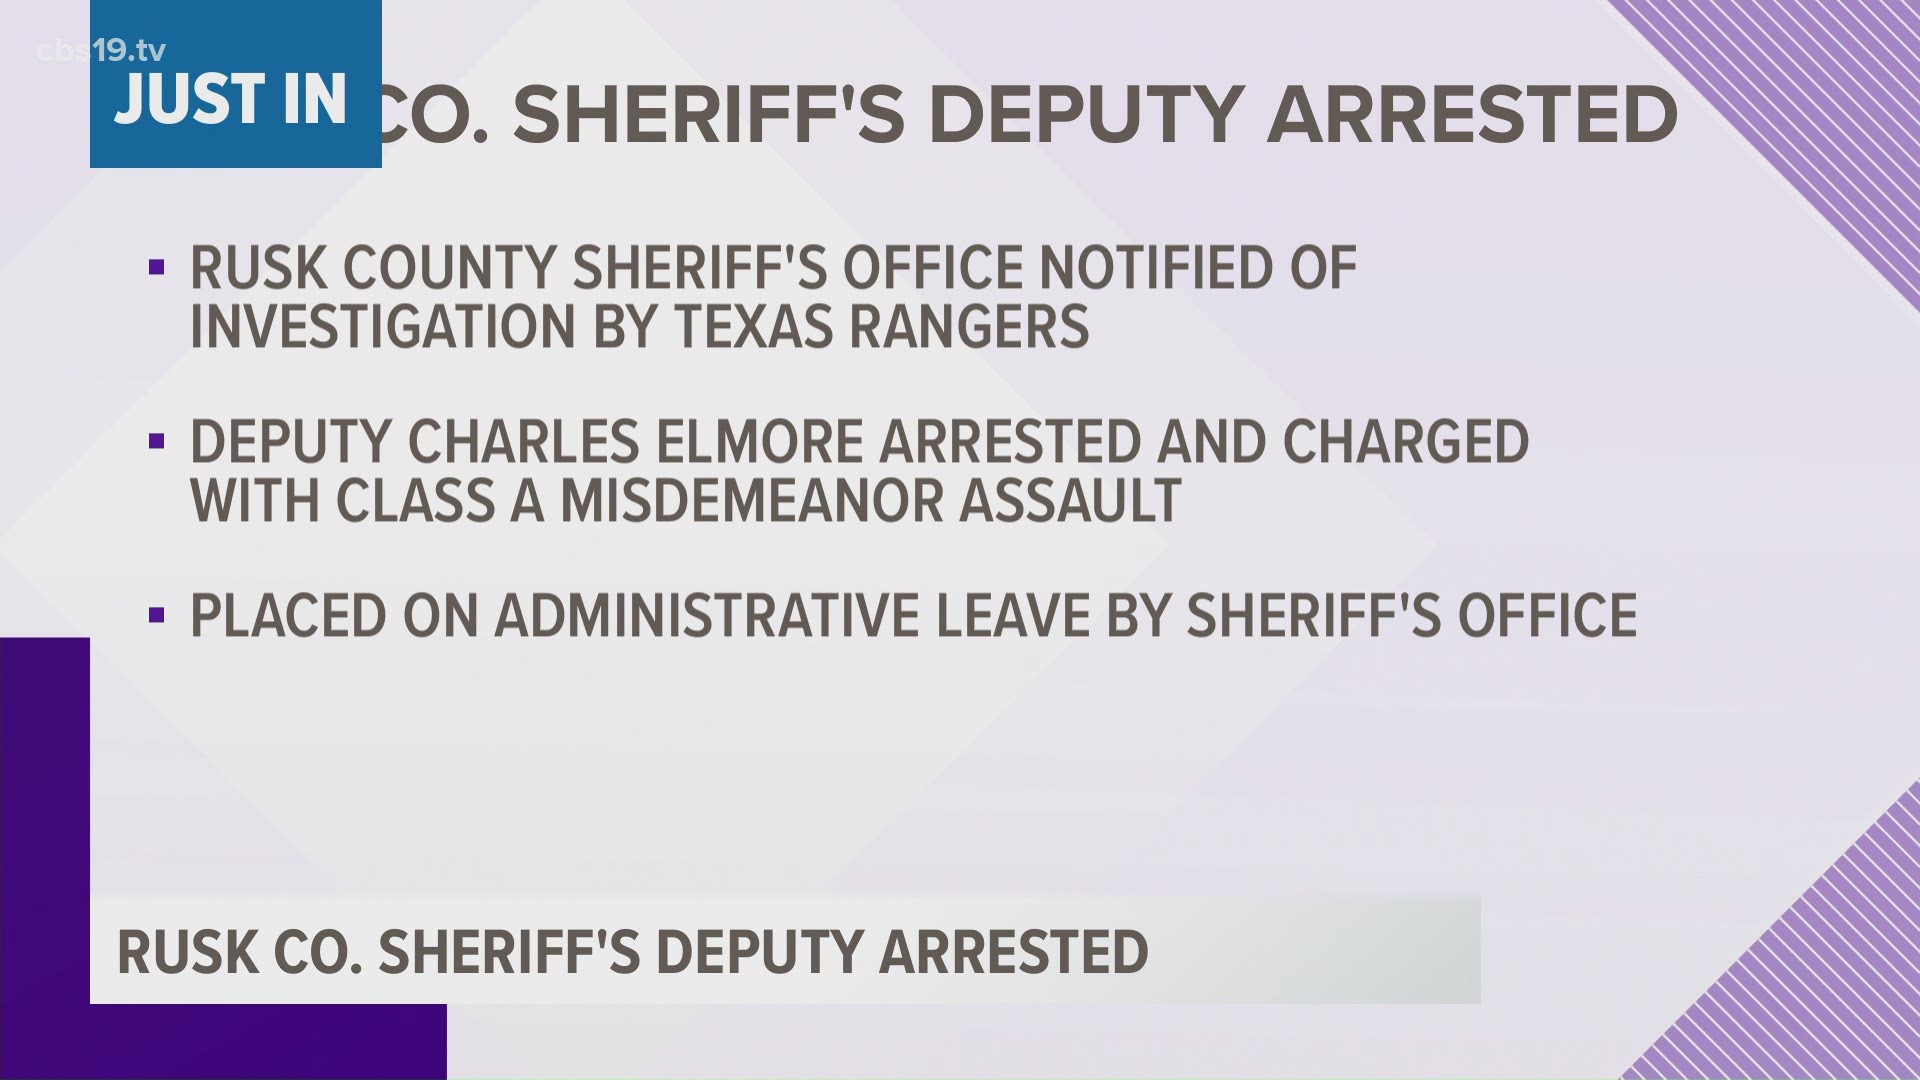 Deputy Charles Elmore has been placed on administrative leave pending.